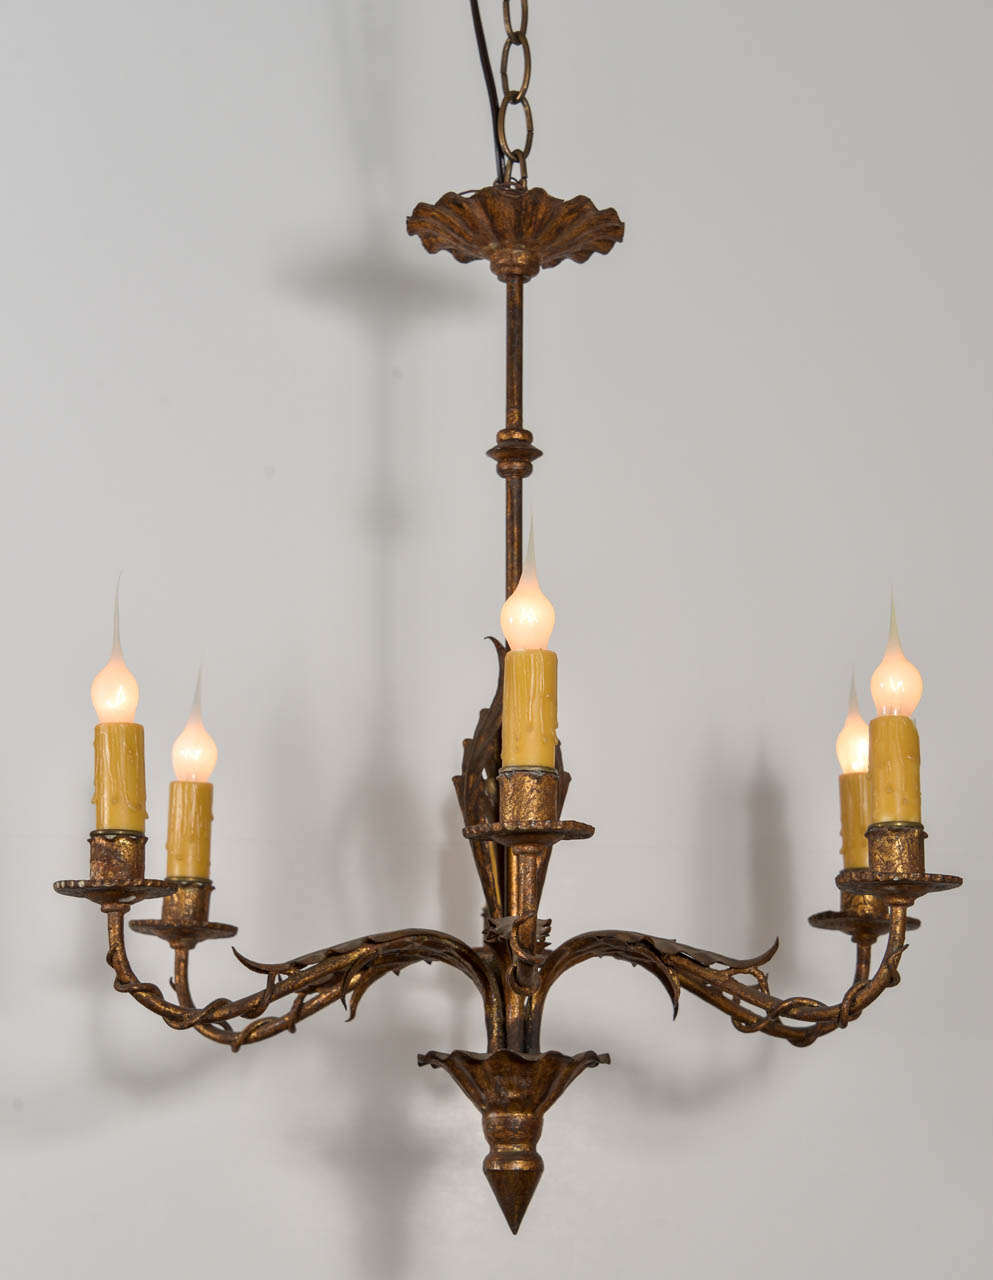 Gilt iron six-arm chandelier, newly-wired with extra chain, canopy and twisting vine and acanthus leaf decoration adorning each arm.